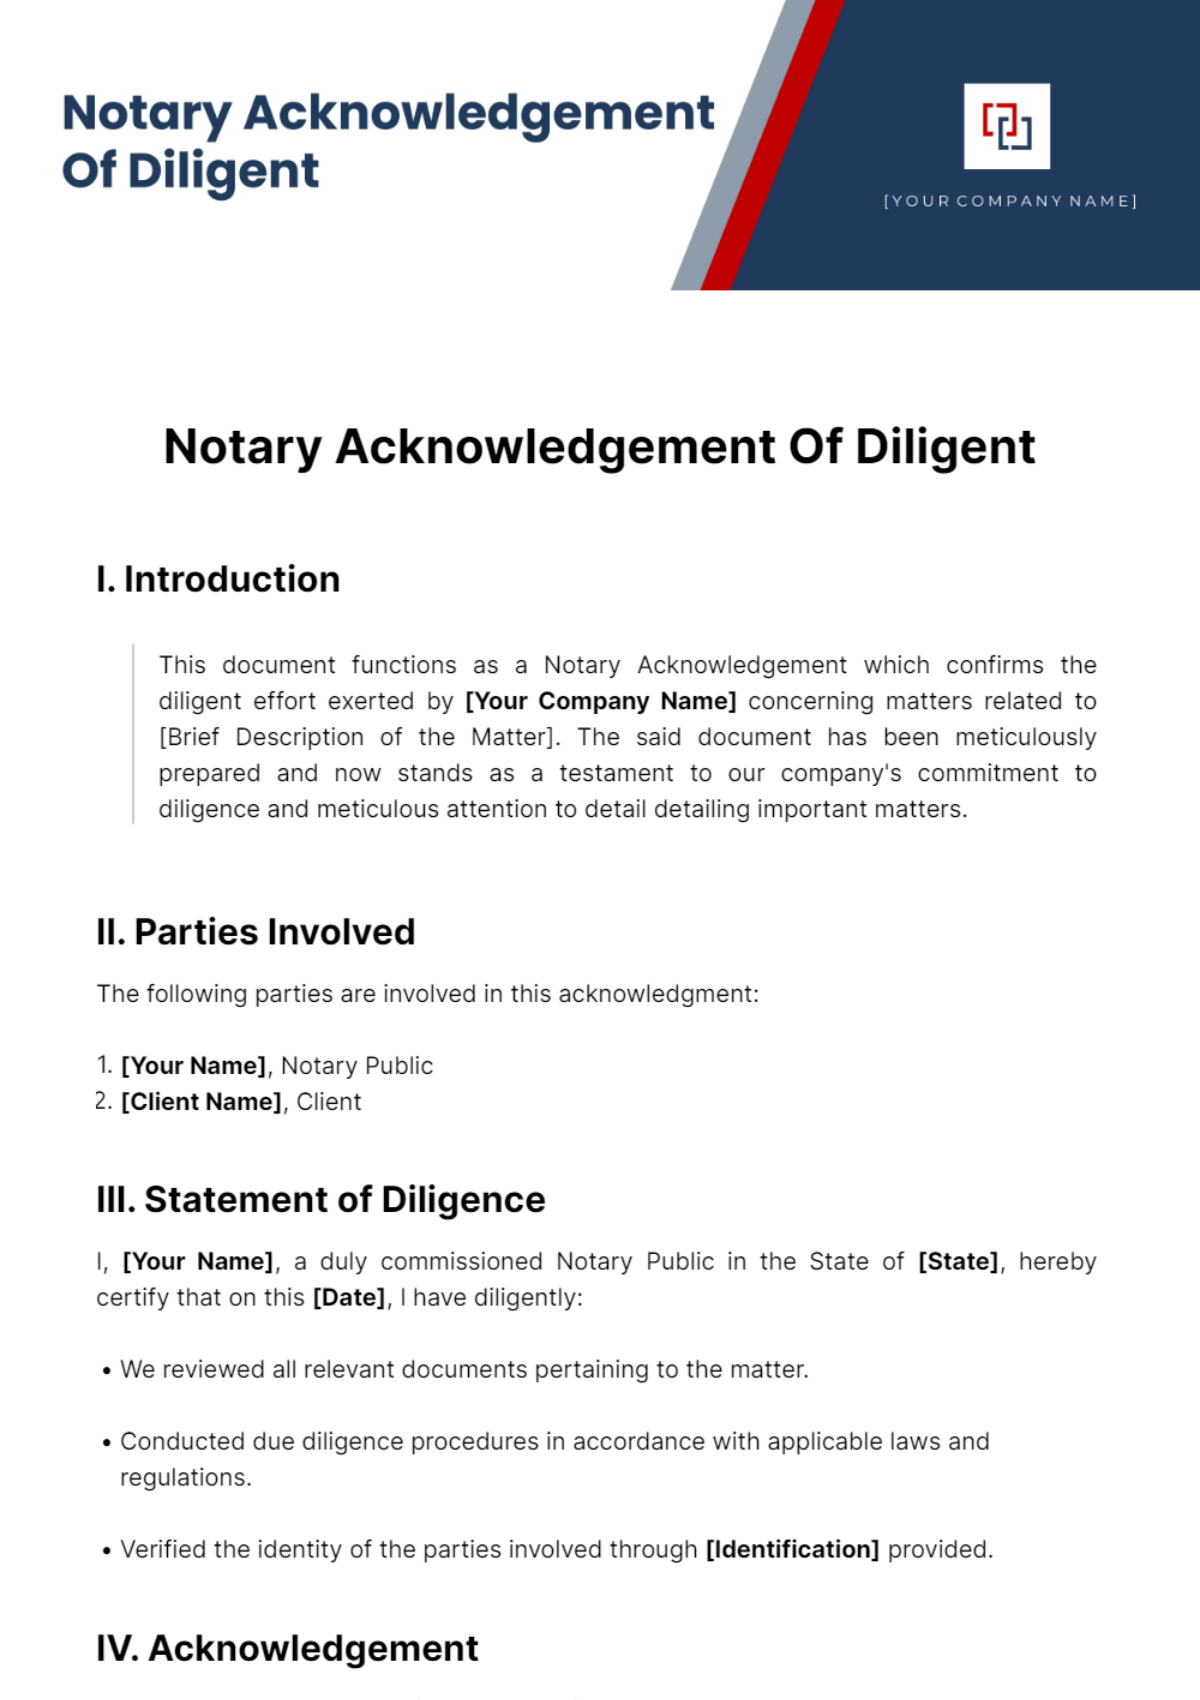 Notary Acknowledgement Of Diligent Template